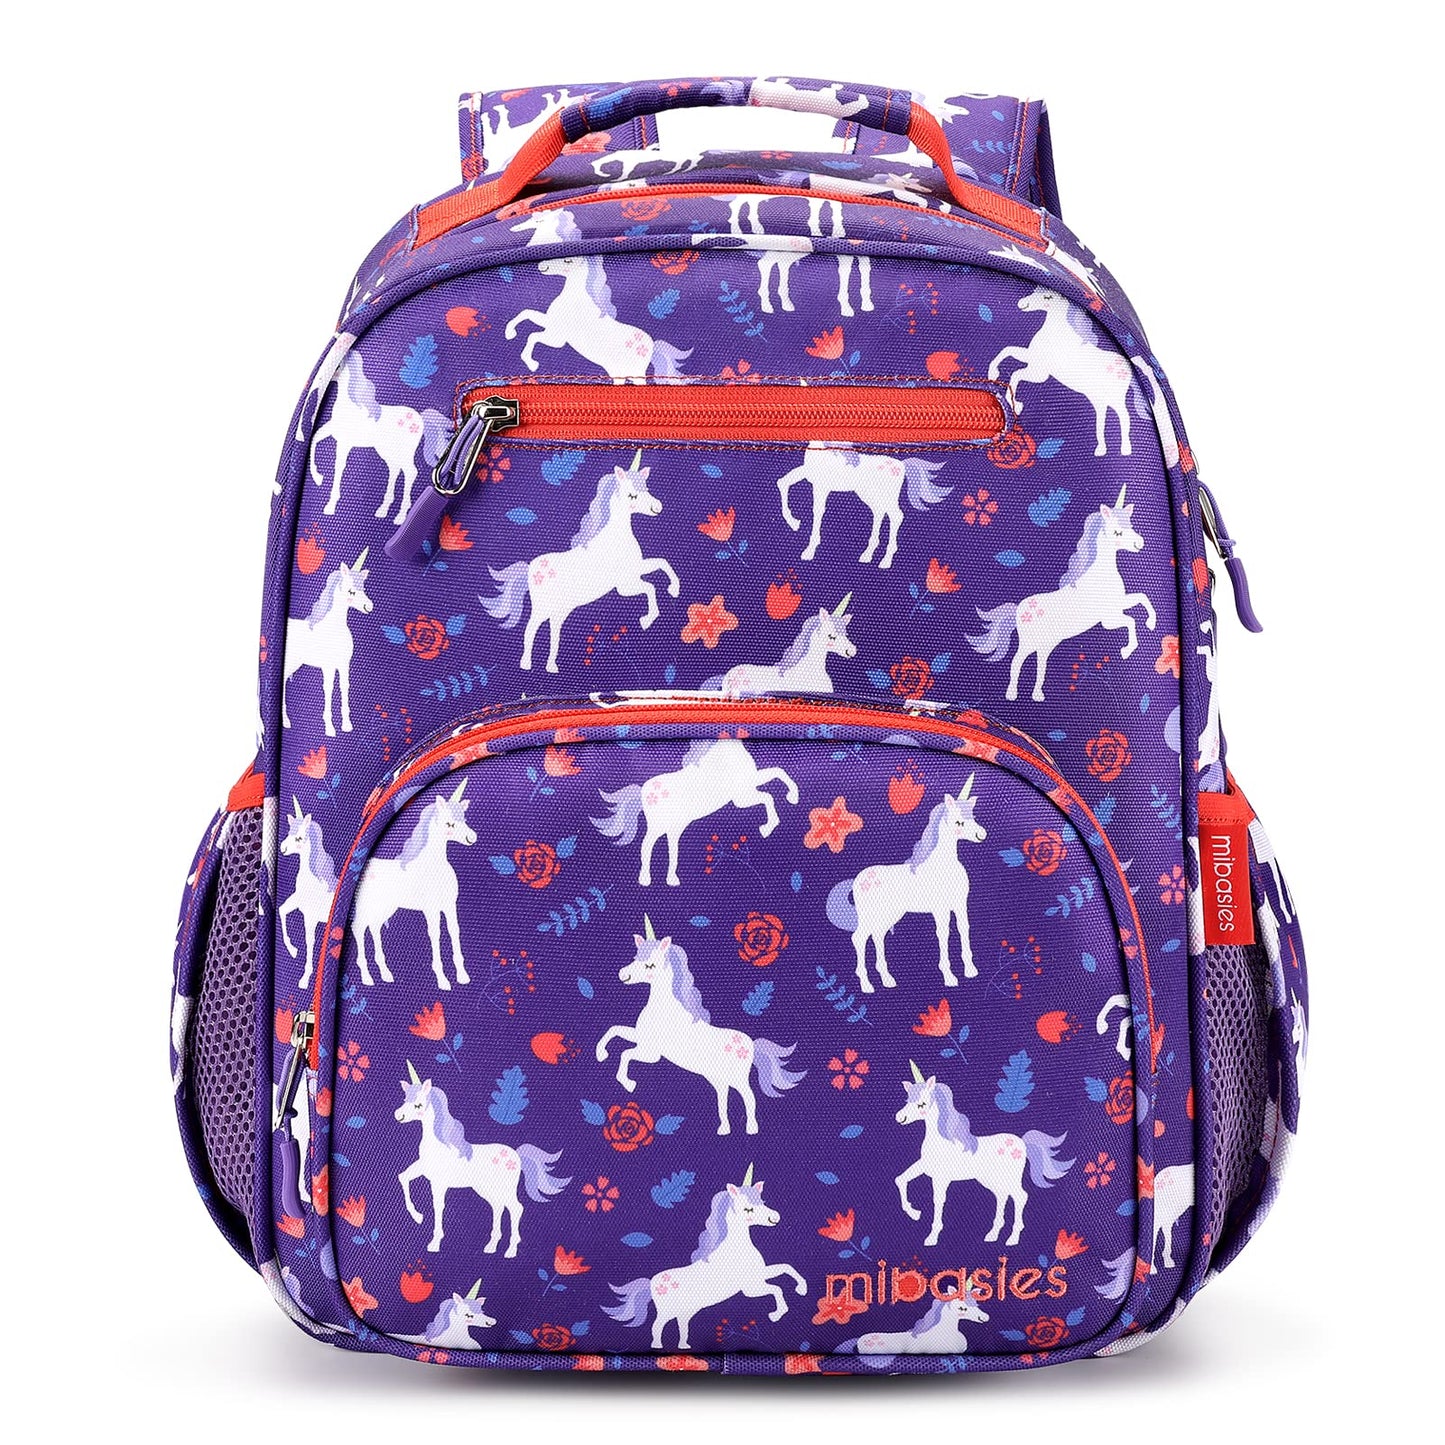 FUN FOR SPRING Kids Backpack